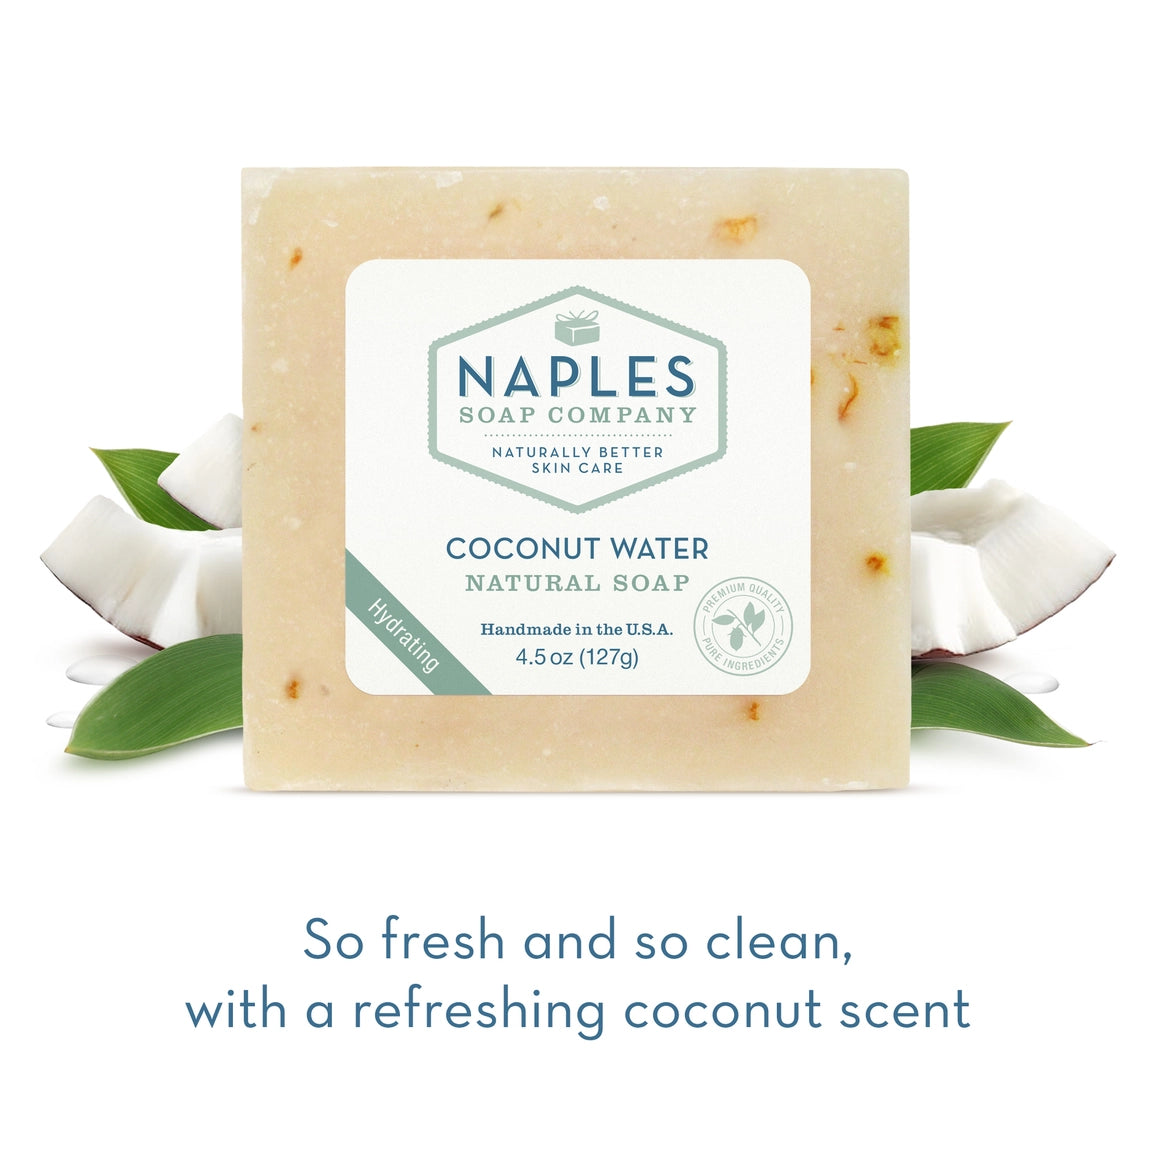 Naples Soap Co.: Coconut Water Natural Soap